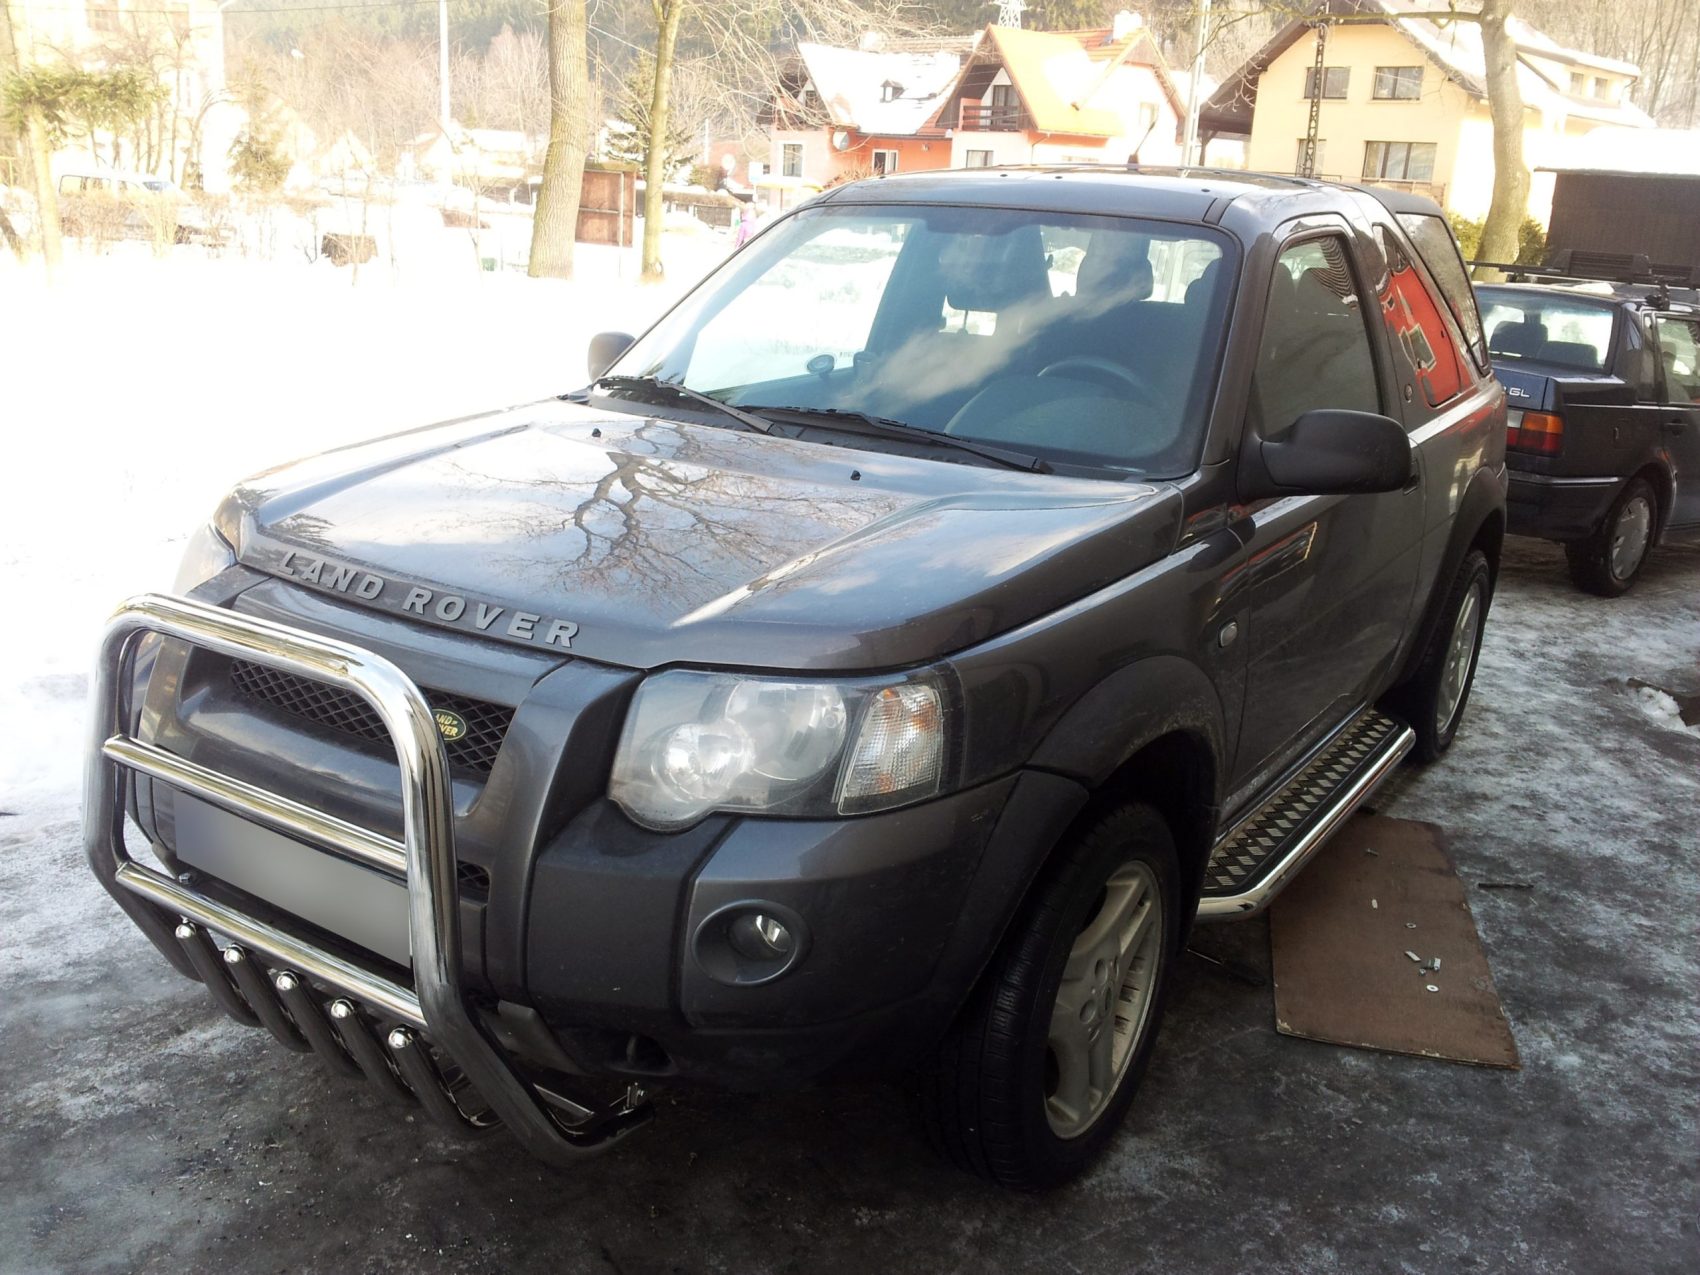 LAND ROVER FREELANDER 1 2004-2006 MARCHE-PIEDS INOX PLAT / PROTECTIONS LATERALES I 1996-2006 339,00 €